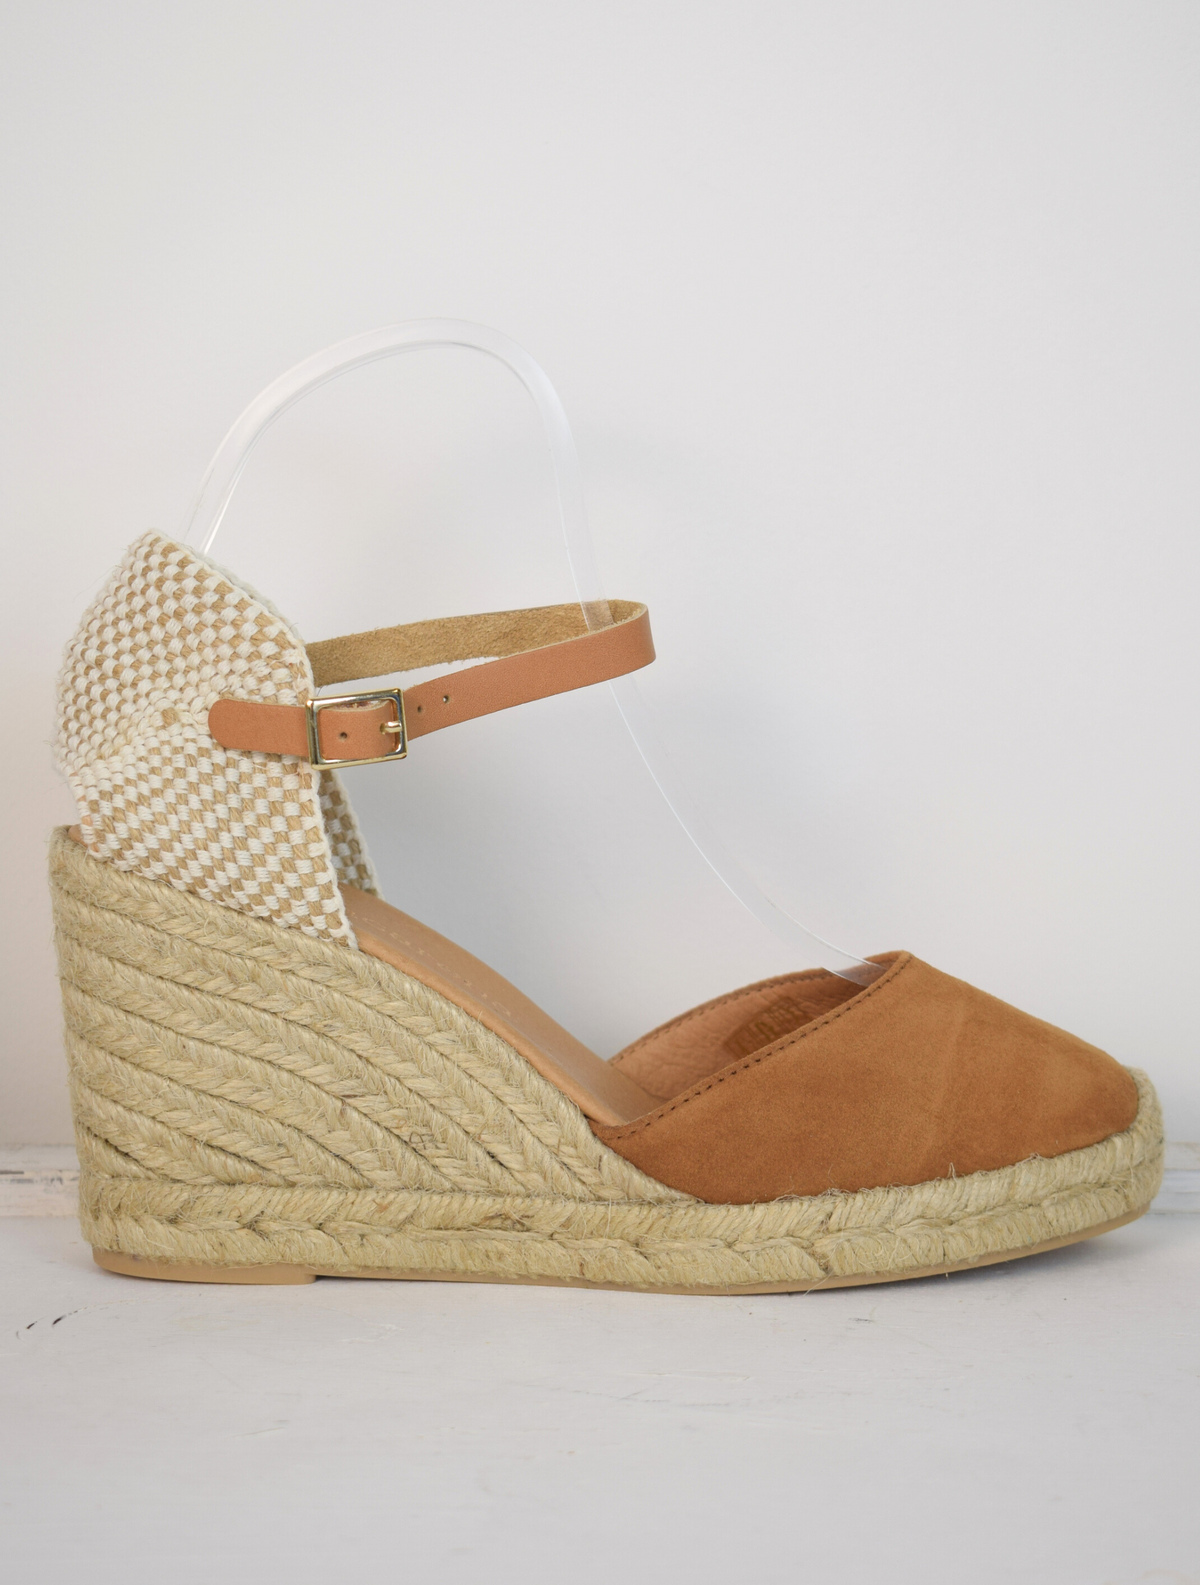 tan coloured wedge sandal with closed toe